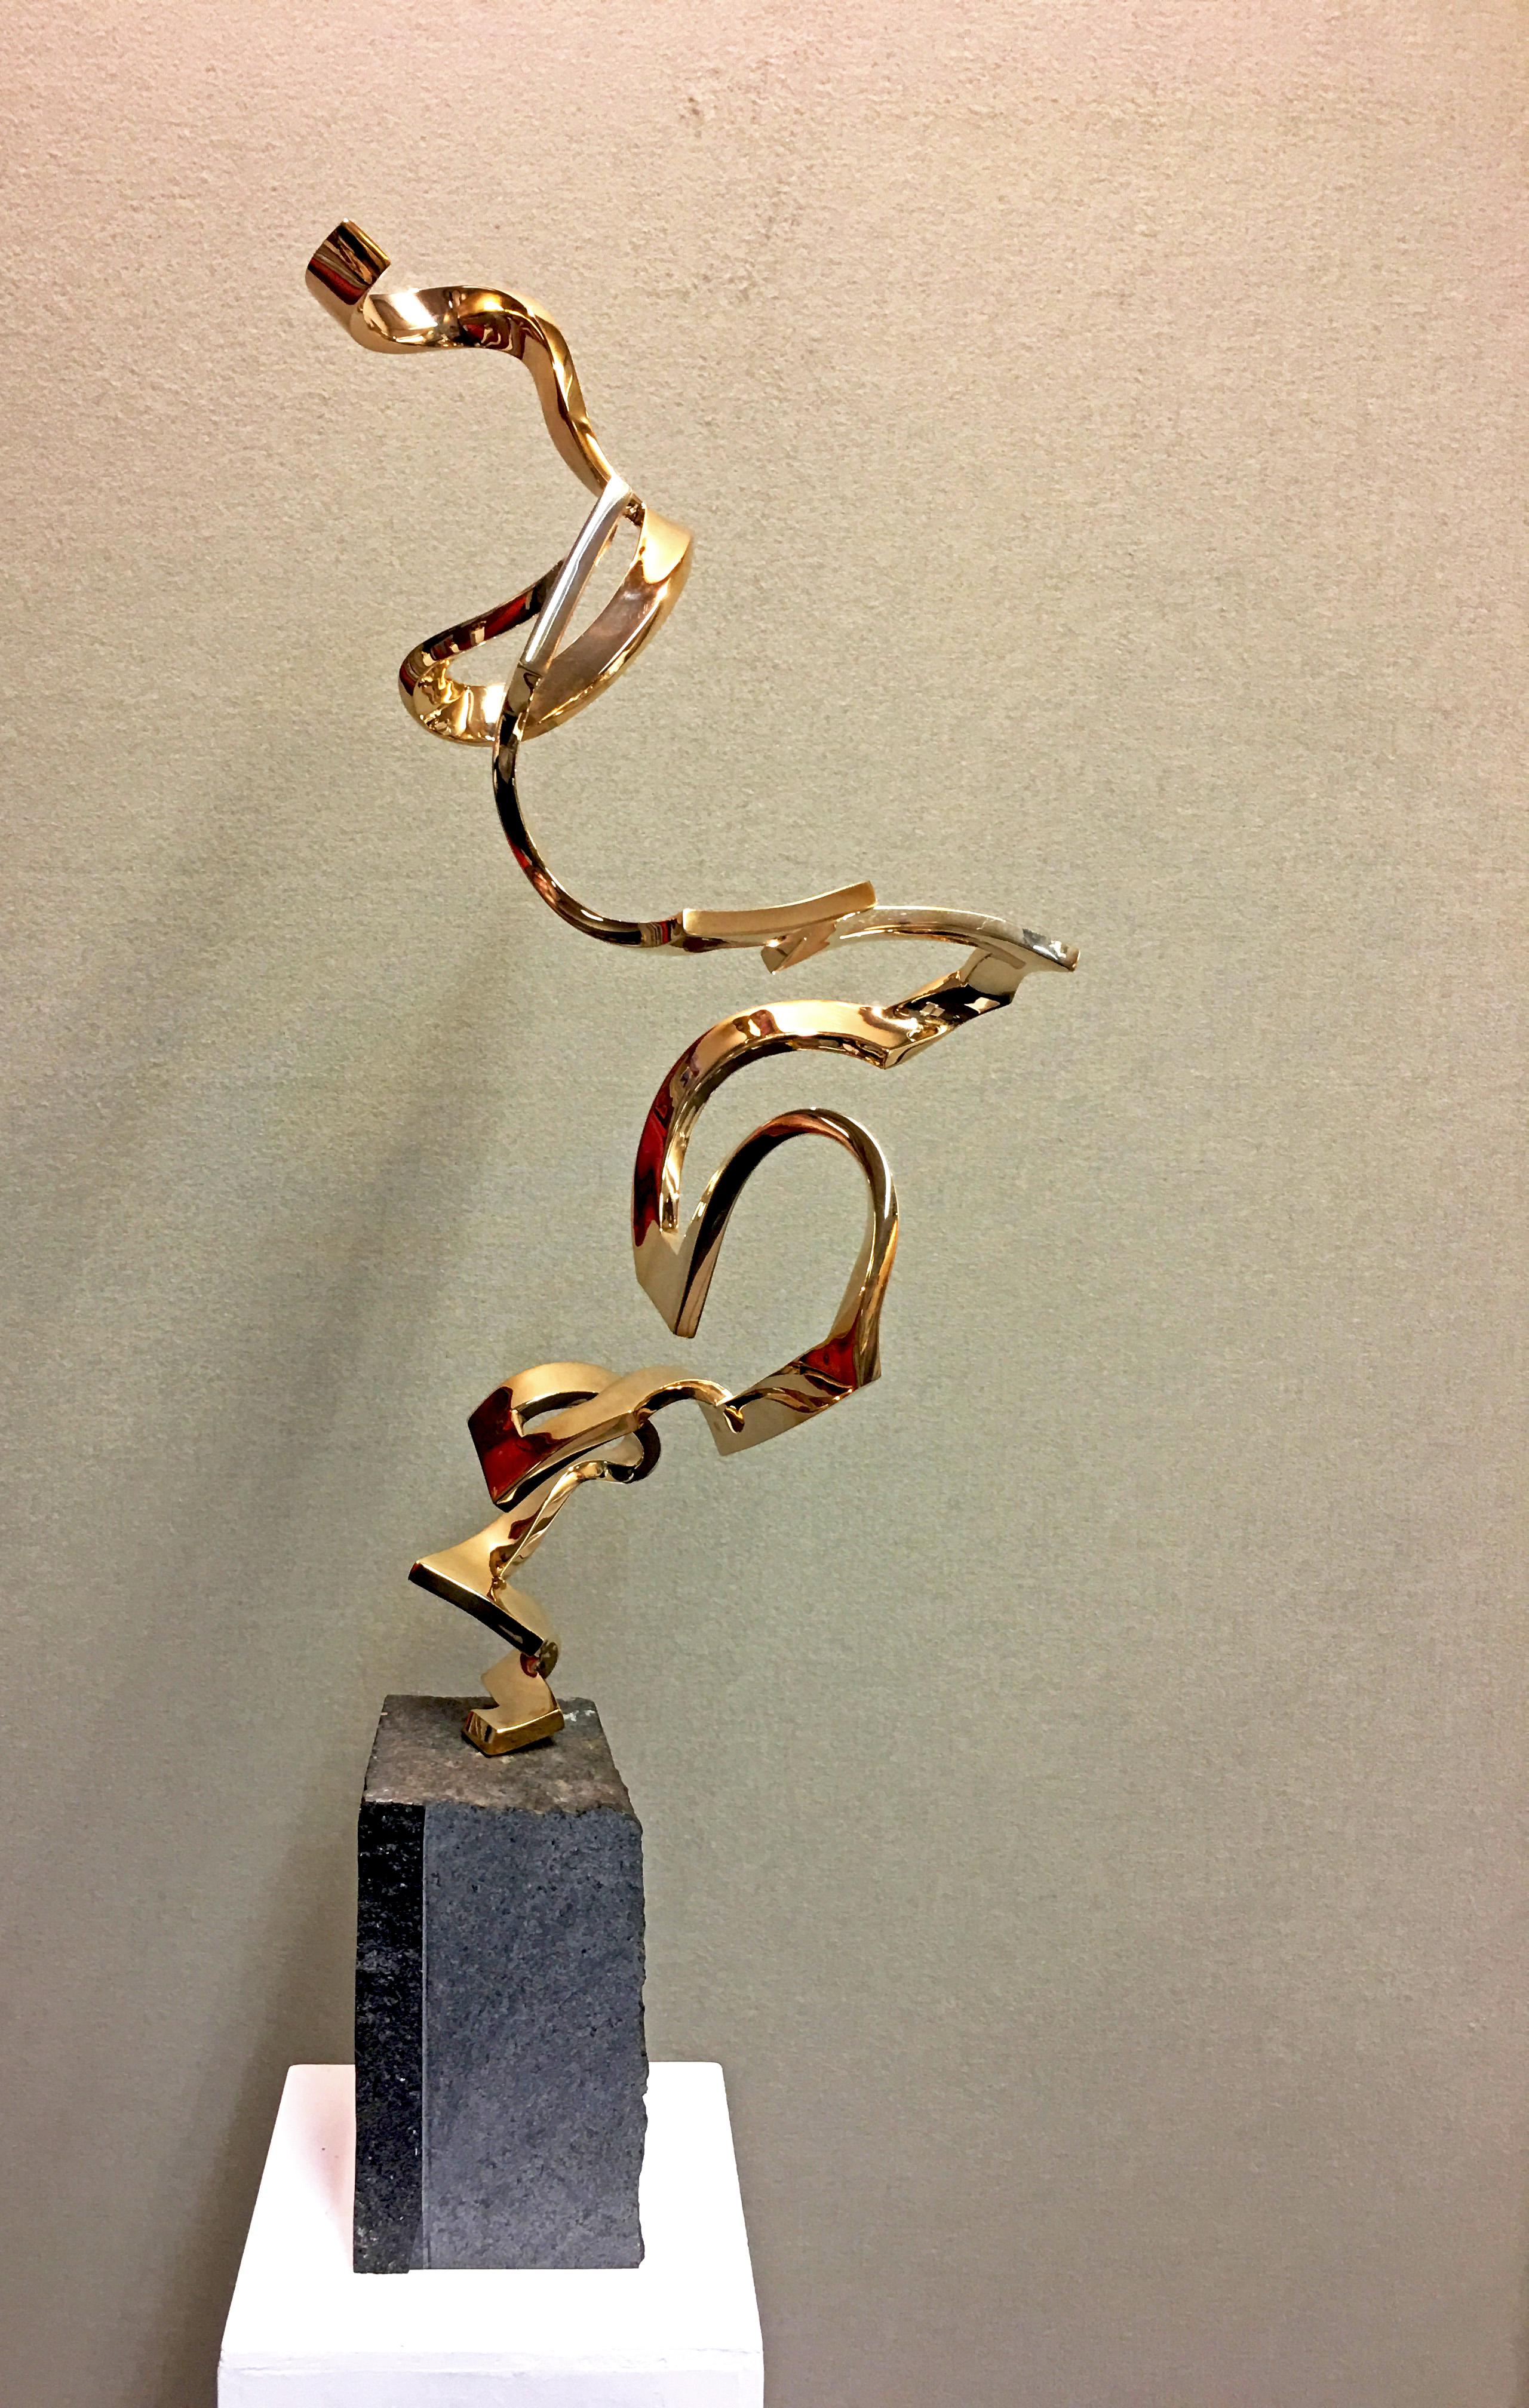 Light as Air by Kuno Vollet - Gold polished Bronze Sculpture on Granite Base For Sale 6